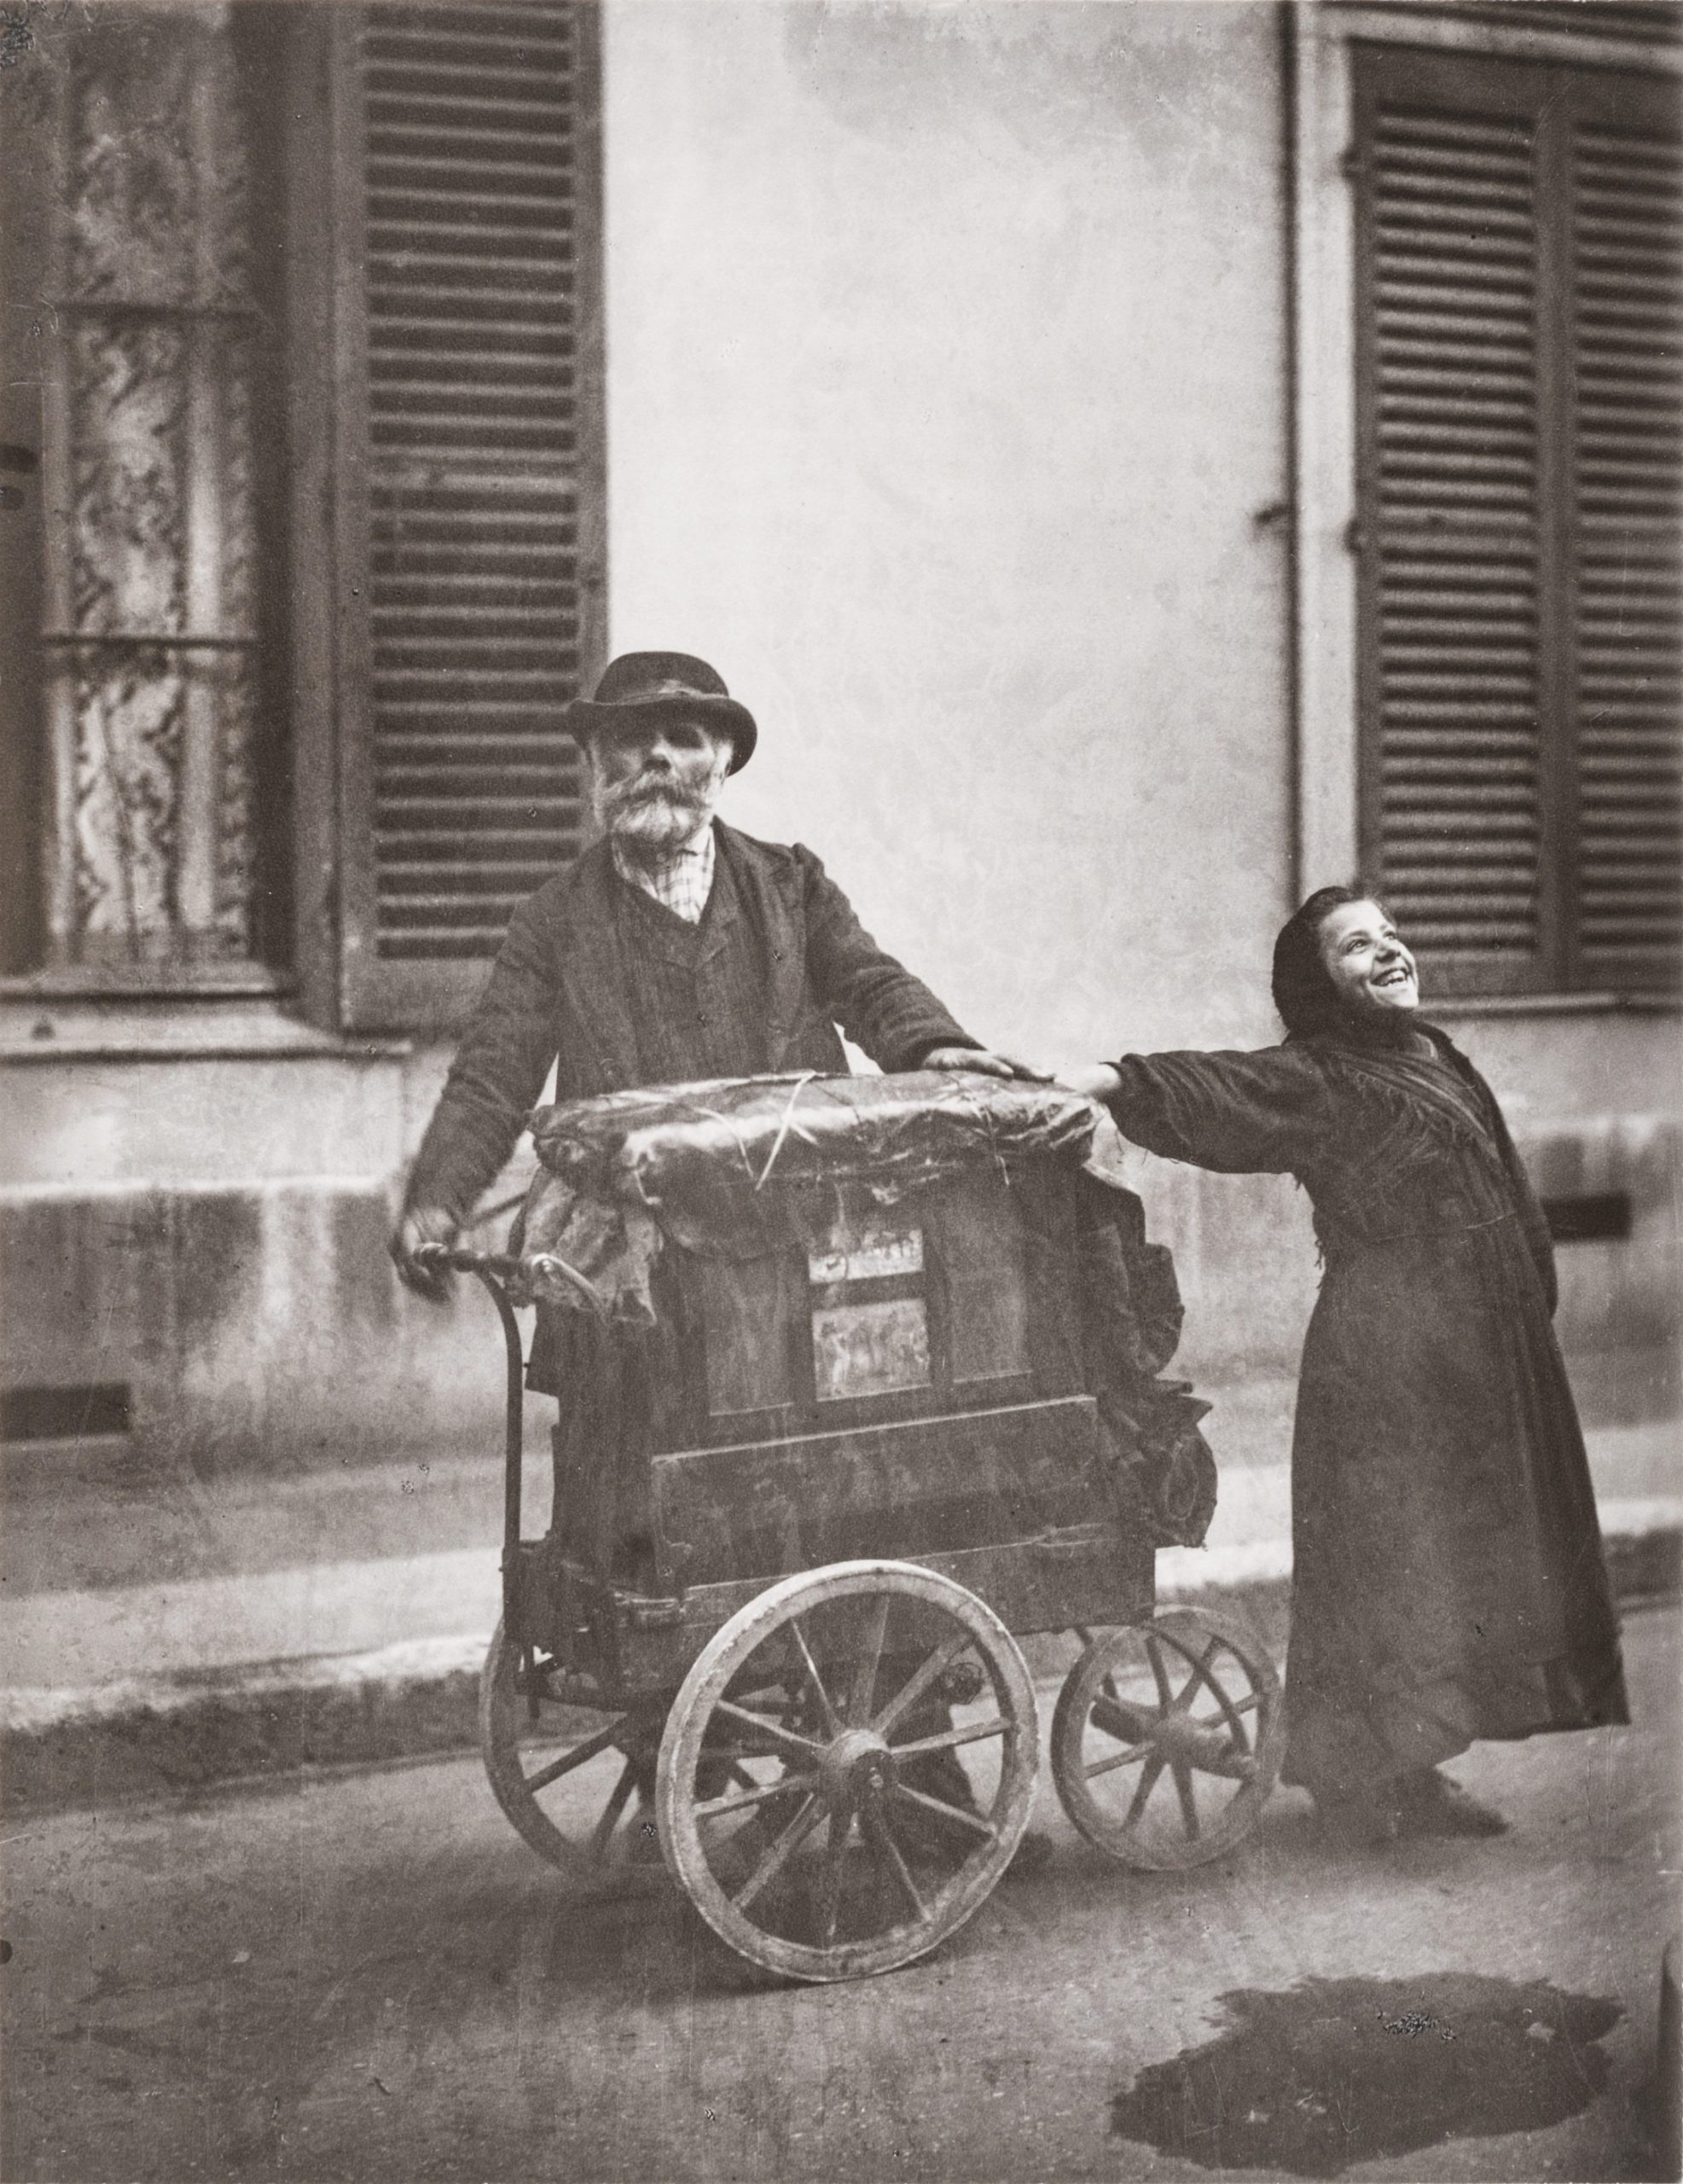 Photo by Eugene Atget, depicting an organ player and street singer on the streets of Paris